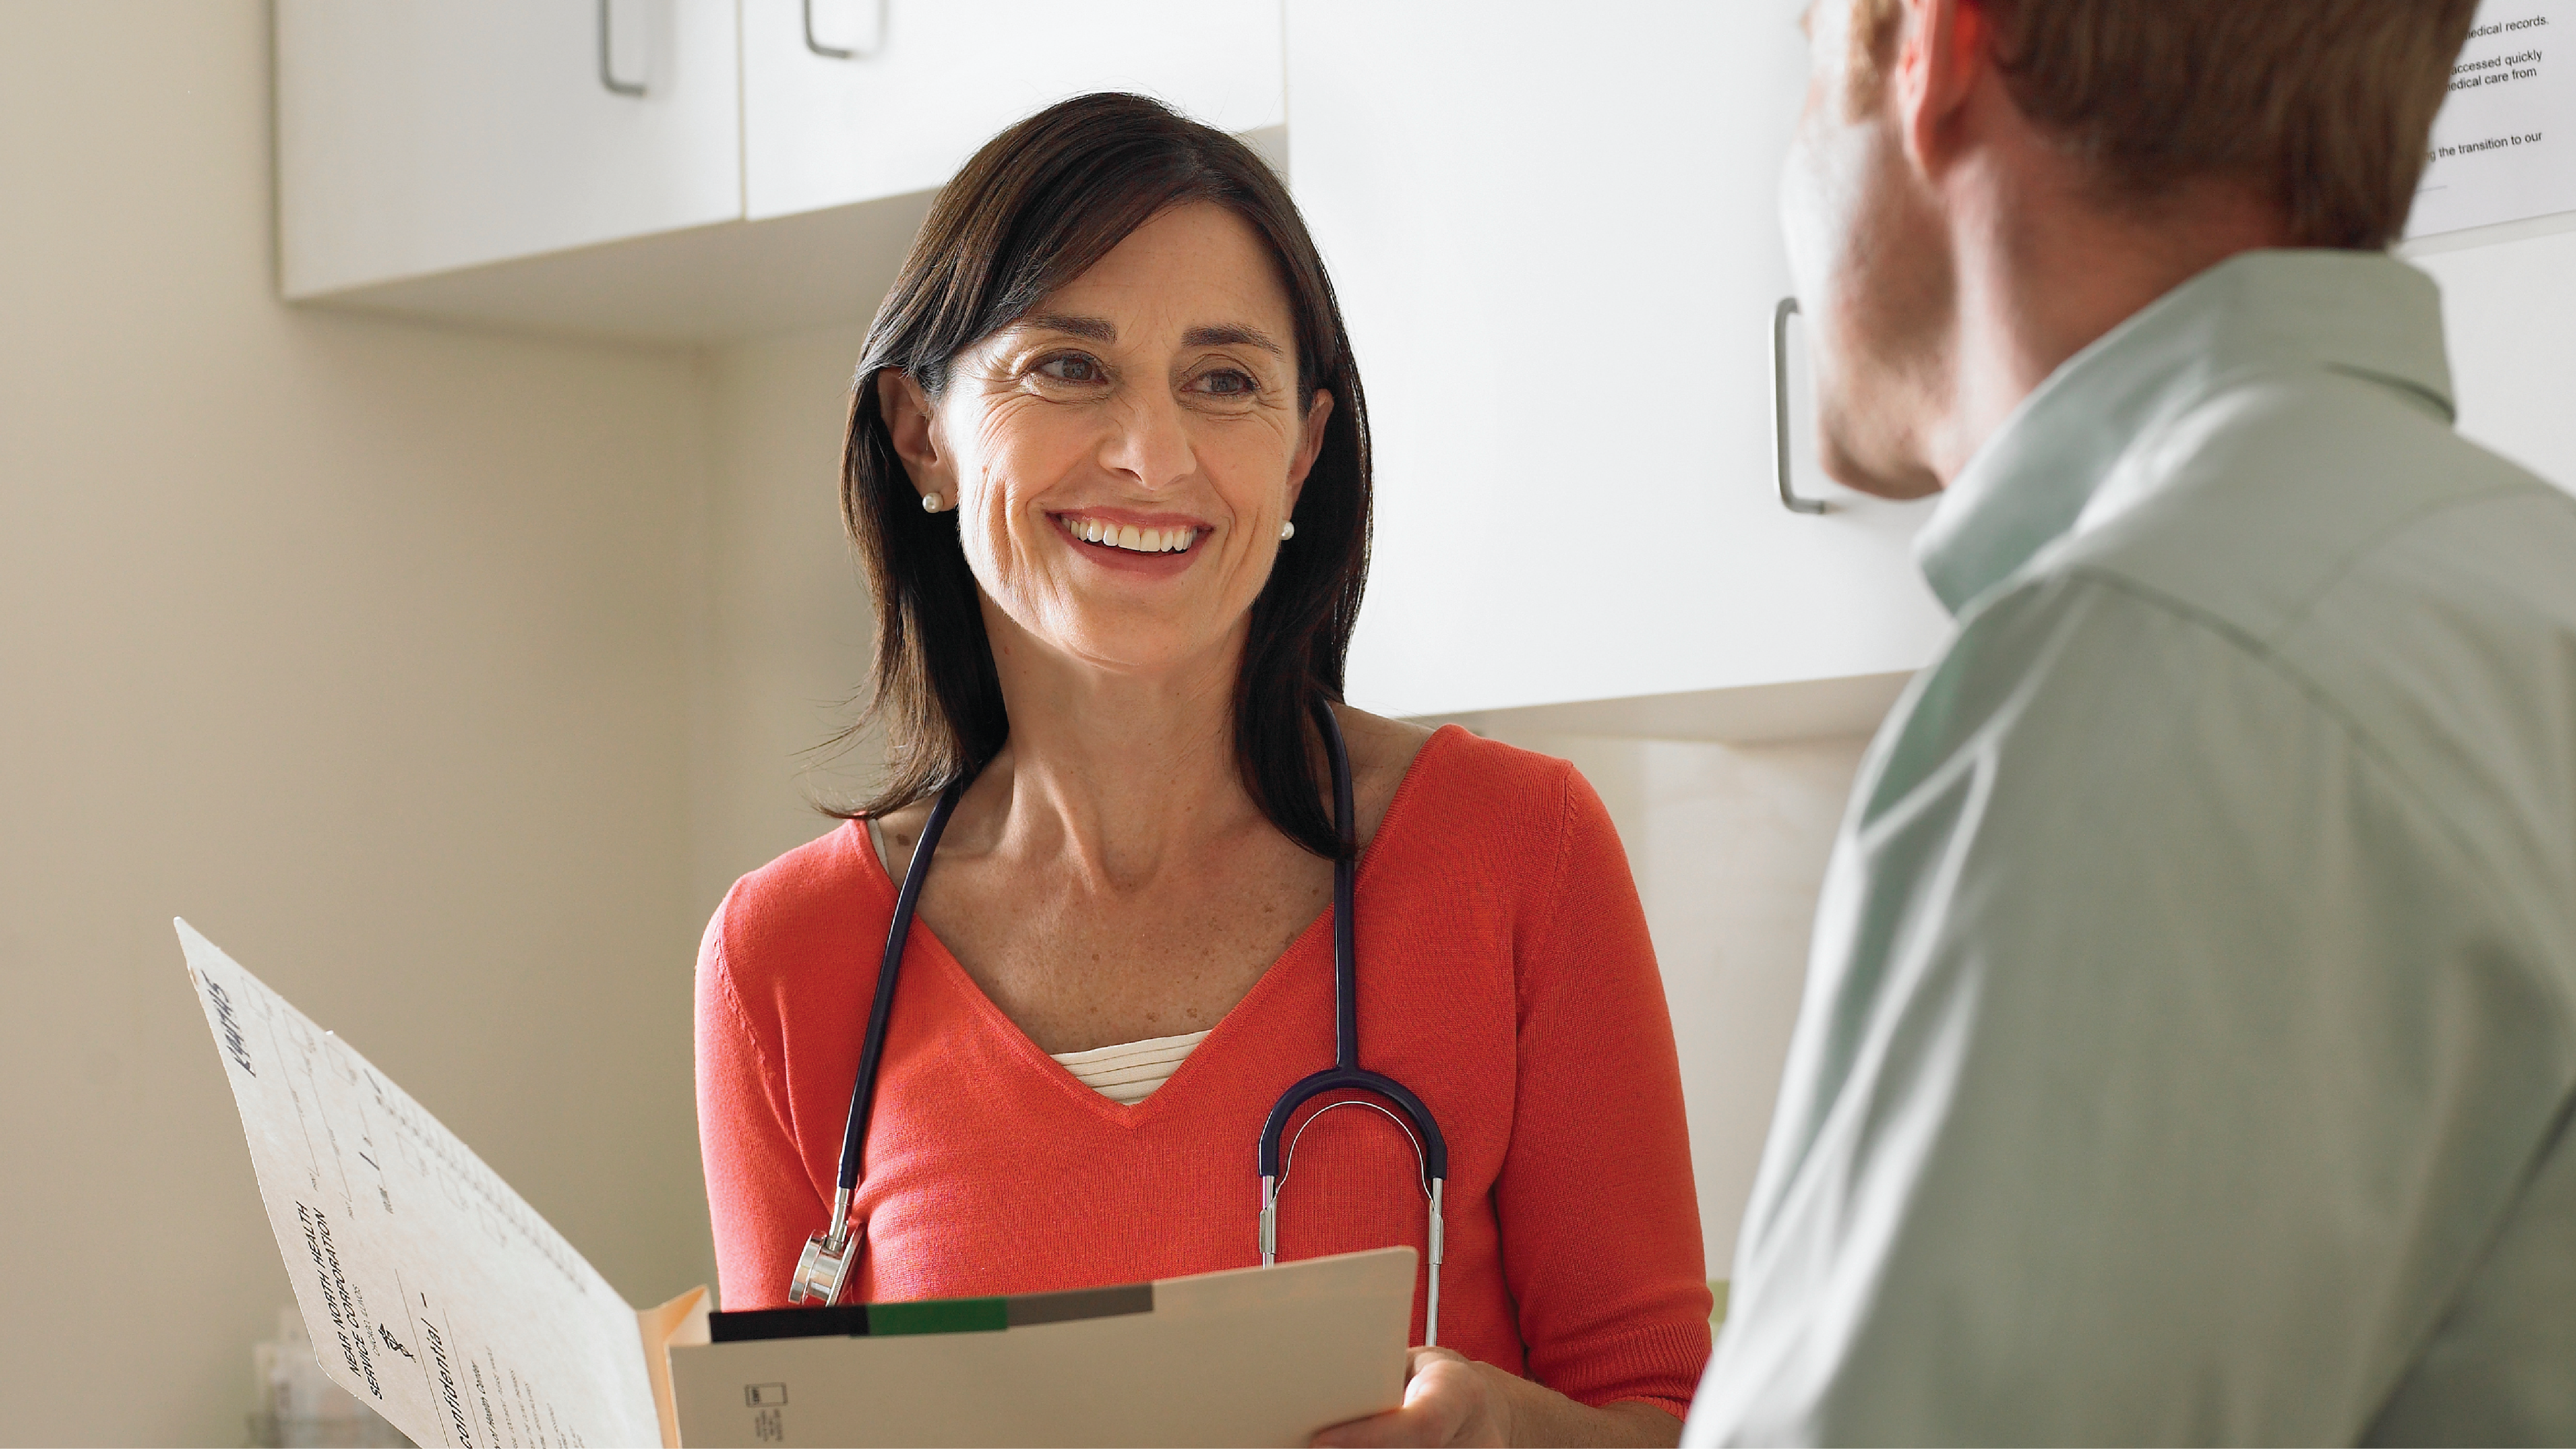 A health care provider smiling and holding a medical chart while talking to a patient.